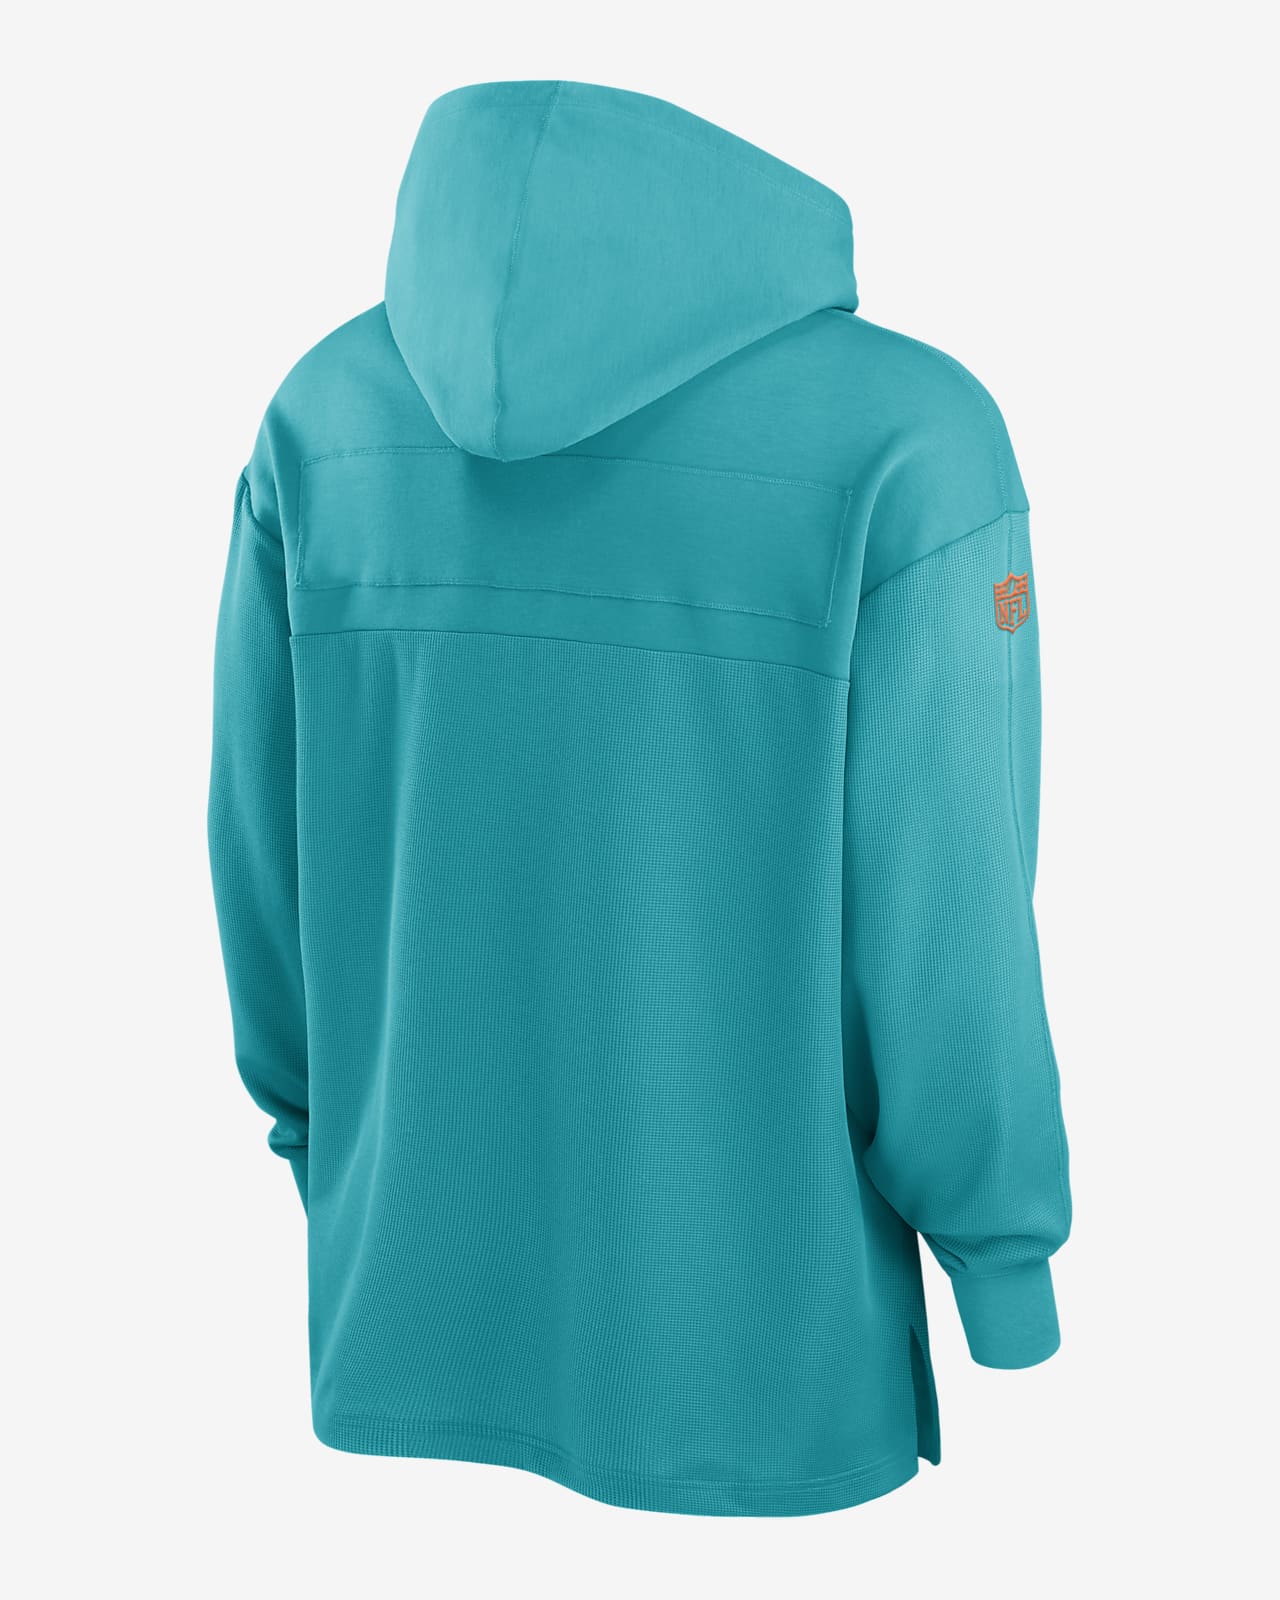 Miami Dolphins Sideline Men's Nike Dri-FIT NFL Long-Sleeve Hooded Top.